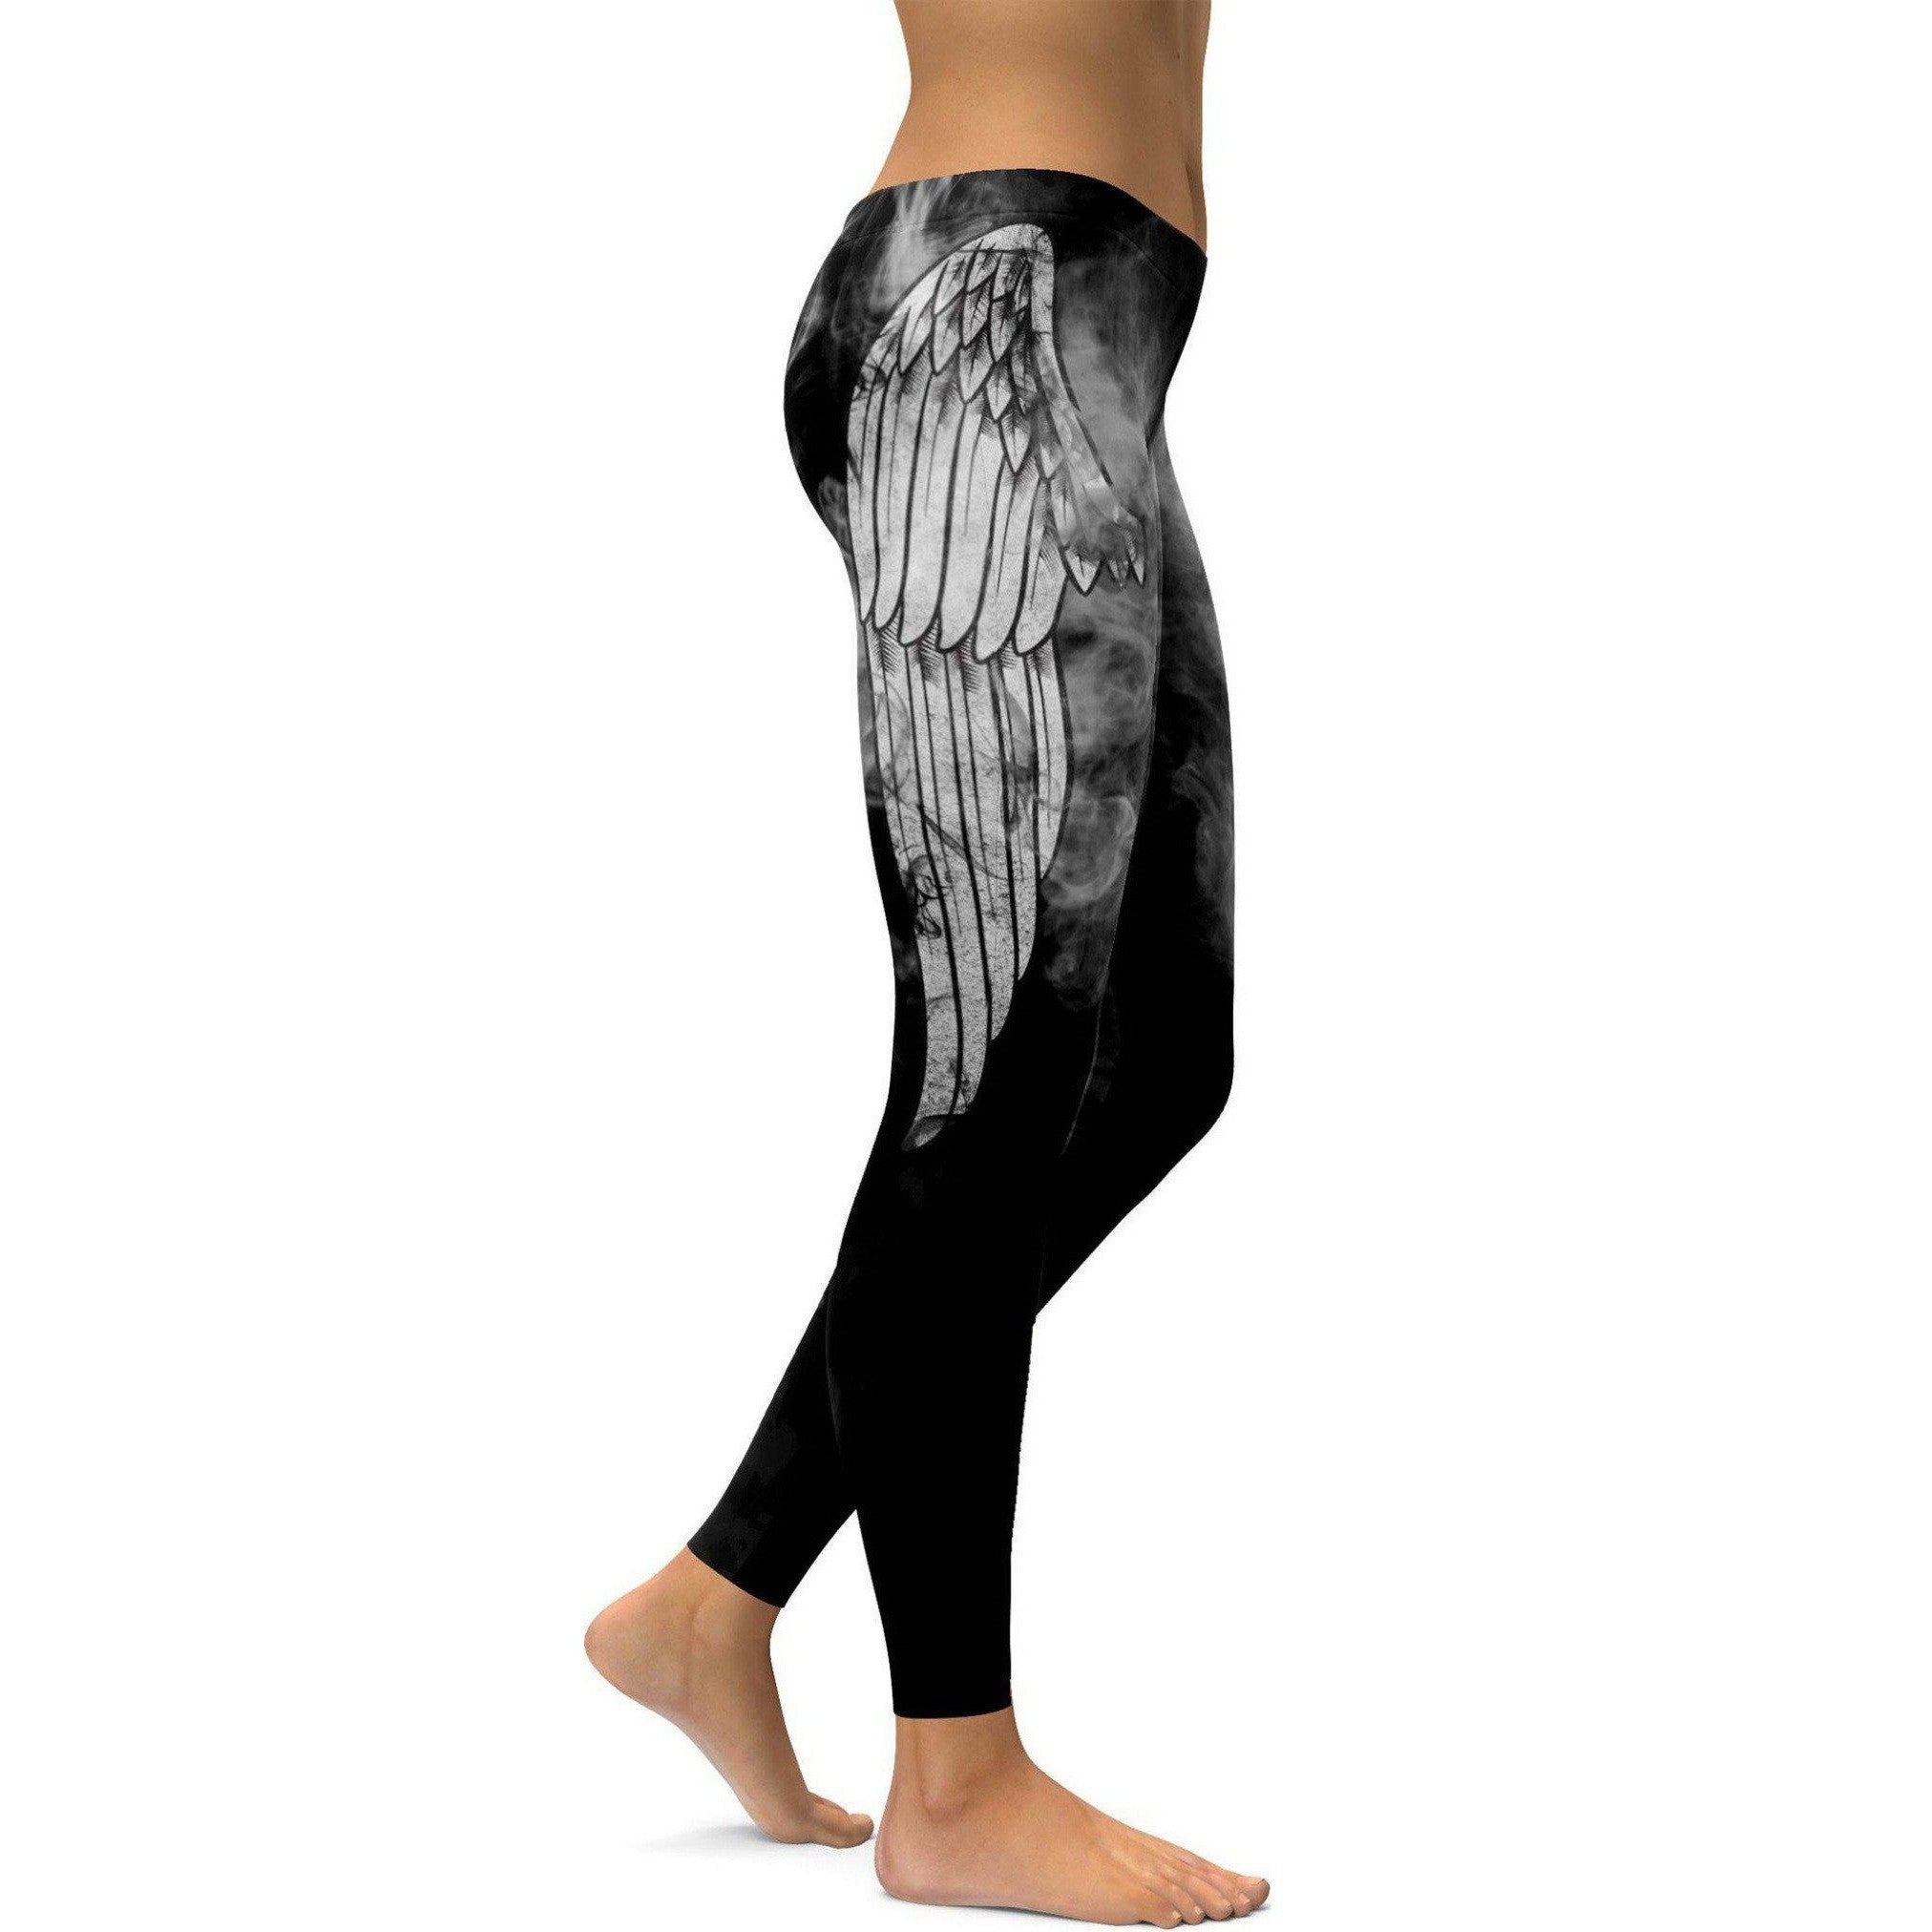 Wing Legging yoga pant double pistol gun with wings embellished